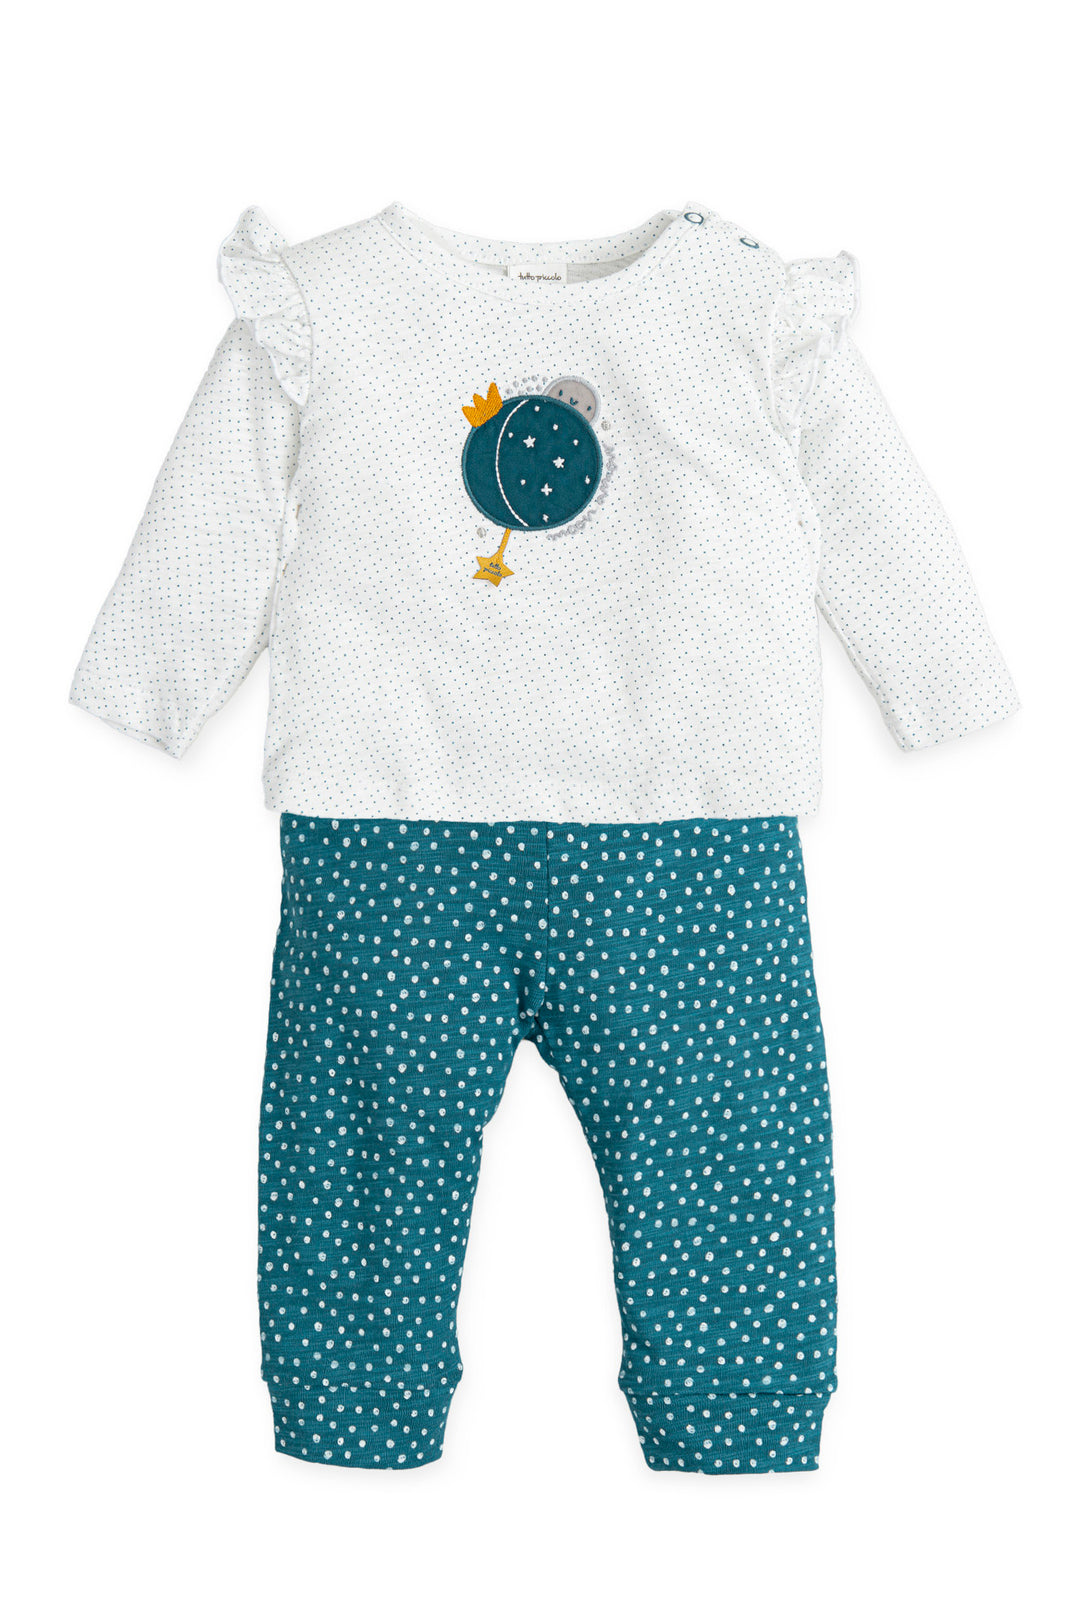 Tutto Piccolo "Calista" Teal Galaxy Print Top & Leggings | iphoneandroidapplications